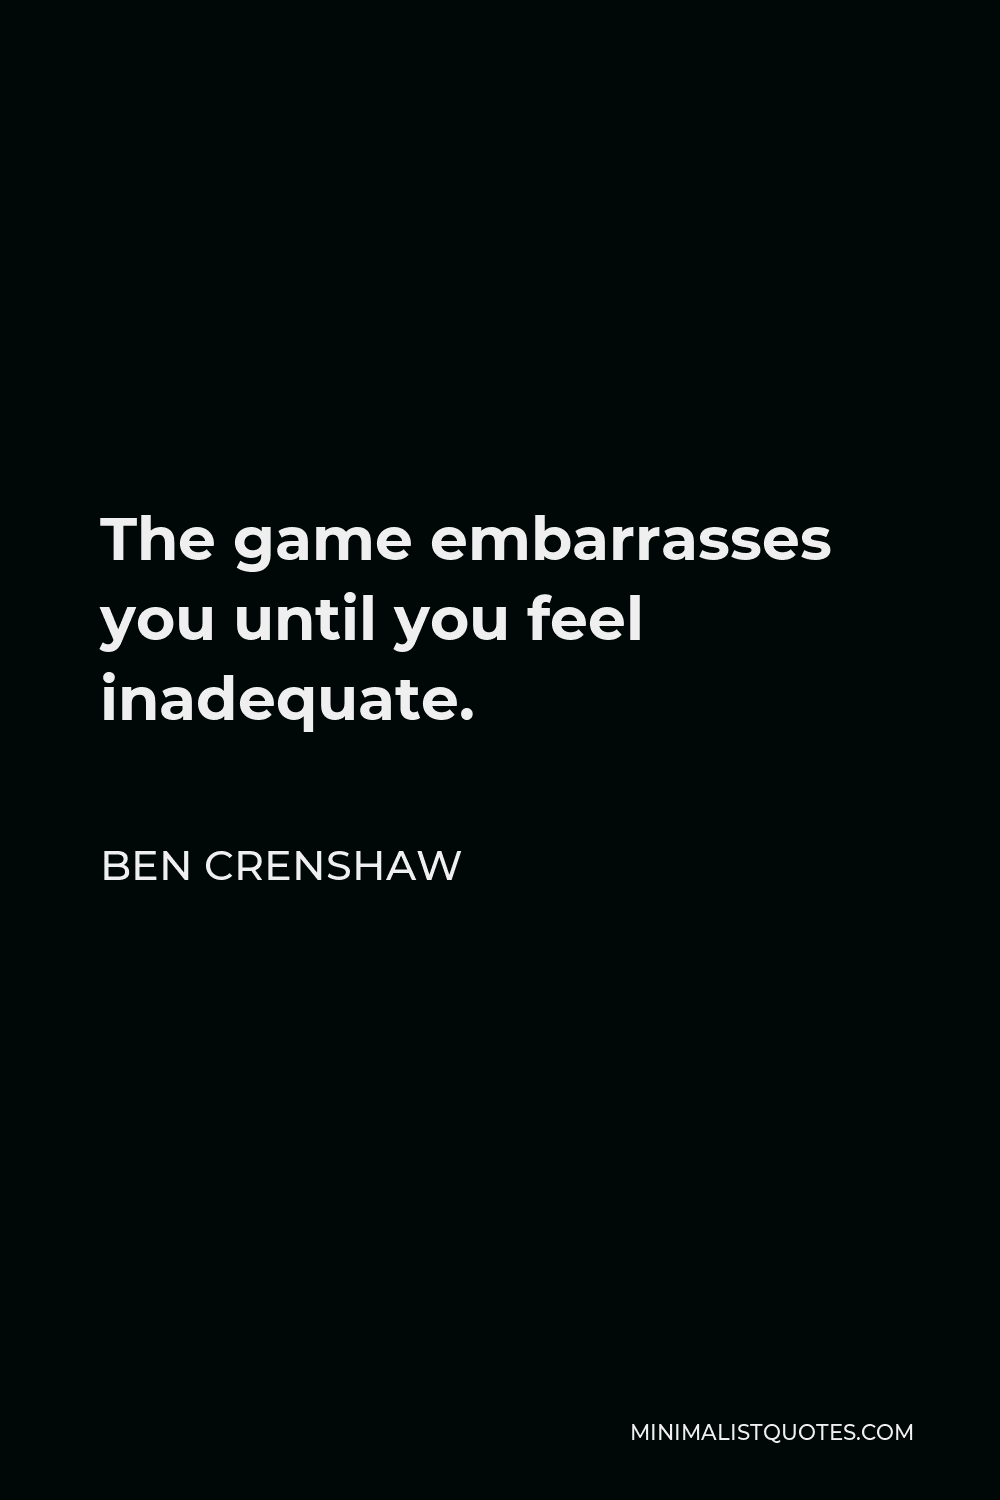 Ben Crenshaw Quote - The game embarrasses you until you feel inadequate.